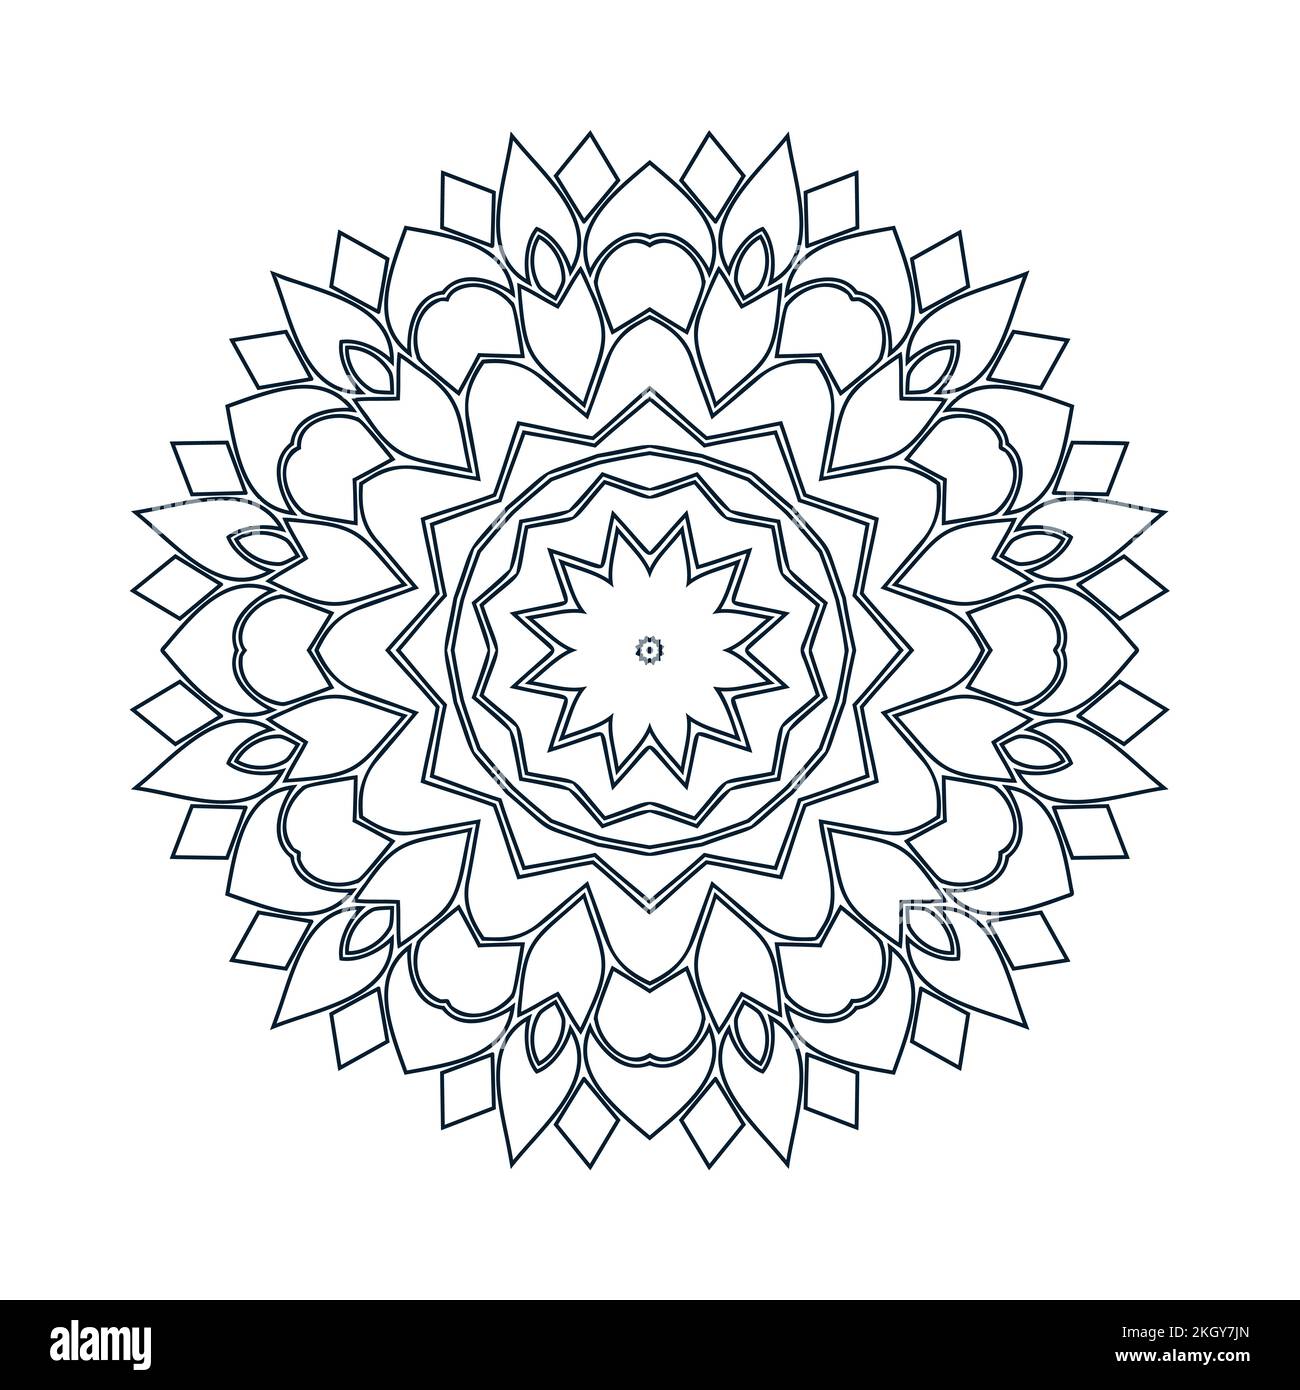 Easy Mandalas Adult Coloring Book Pages Stock Vector (Royalty Free